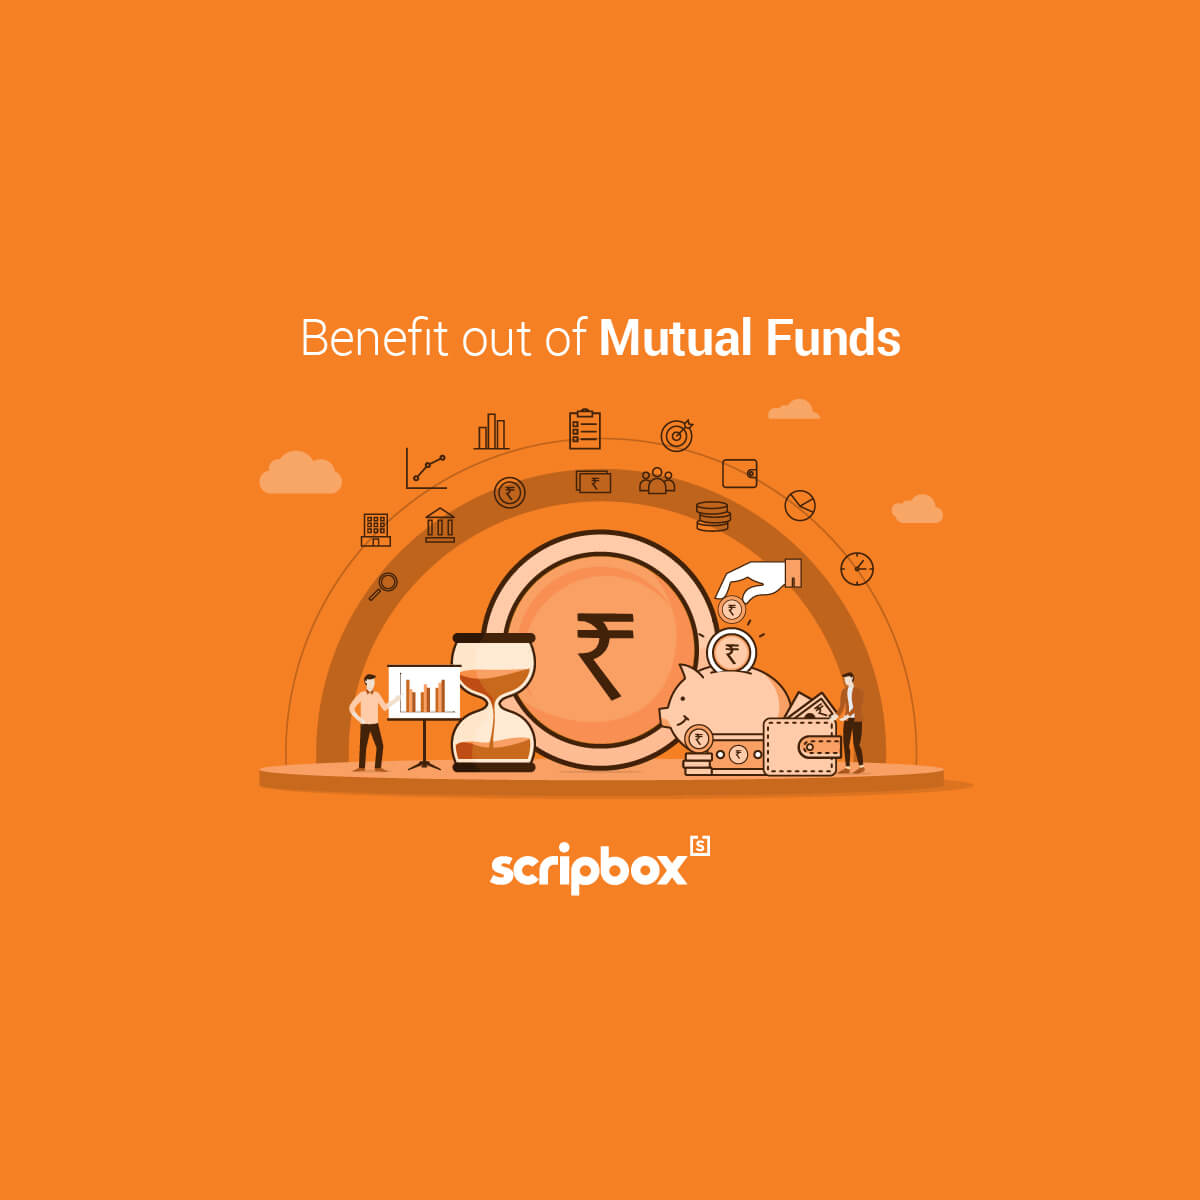 Advantages and Benefits of investing in Mutual Funds in India